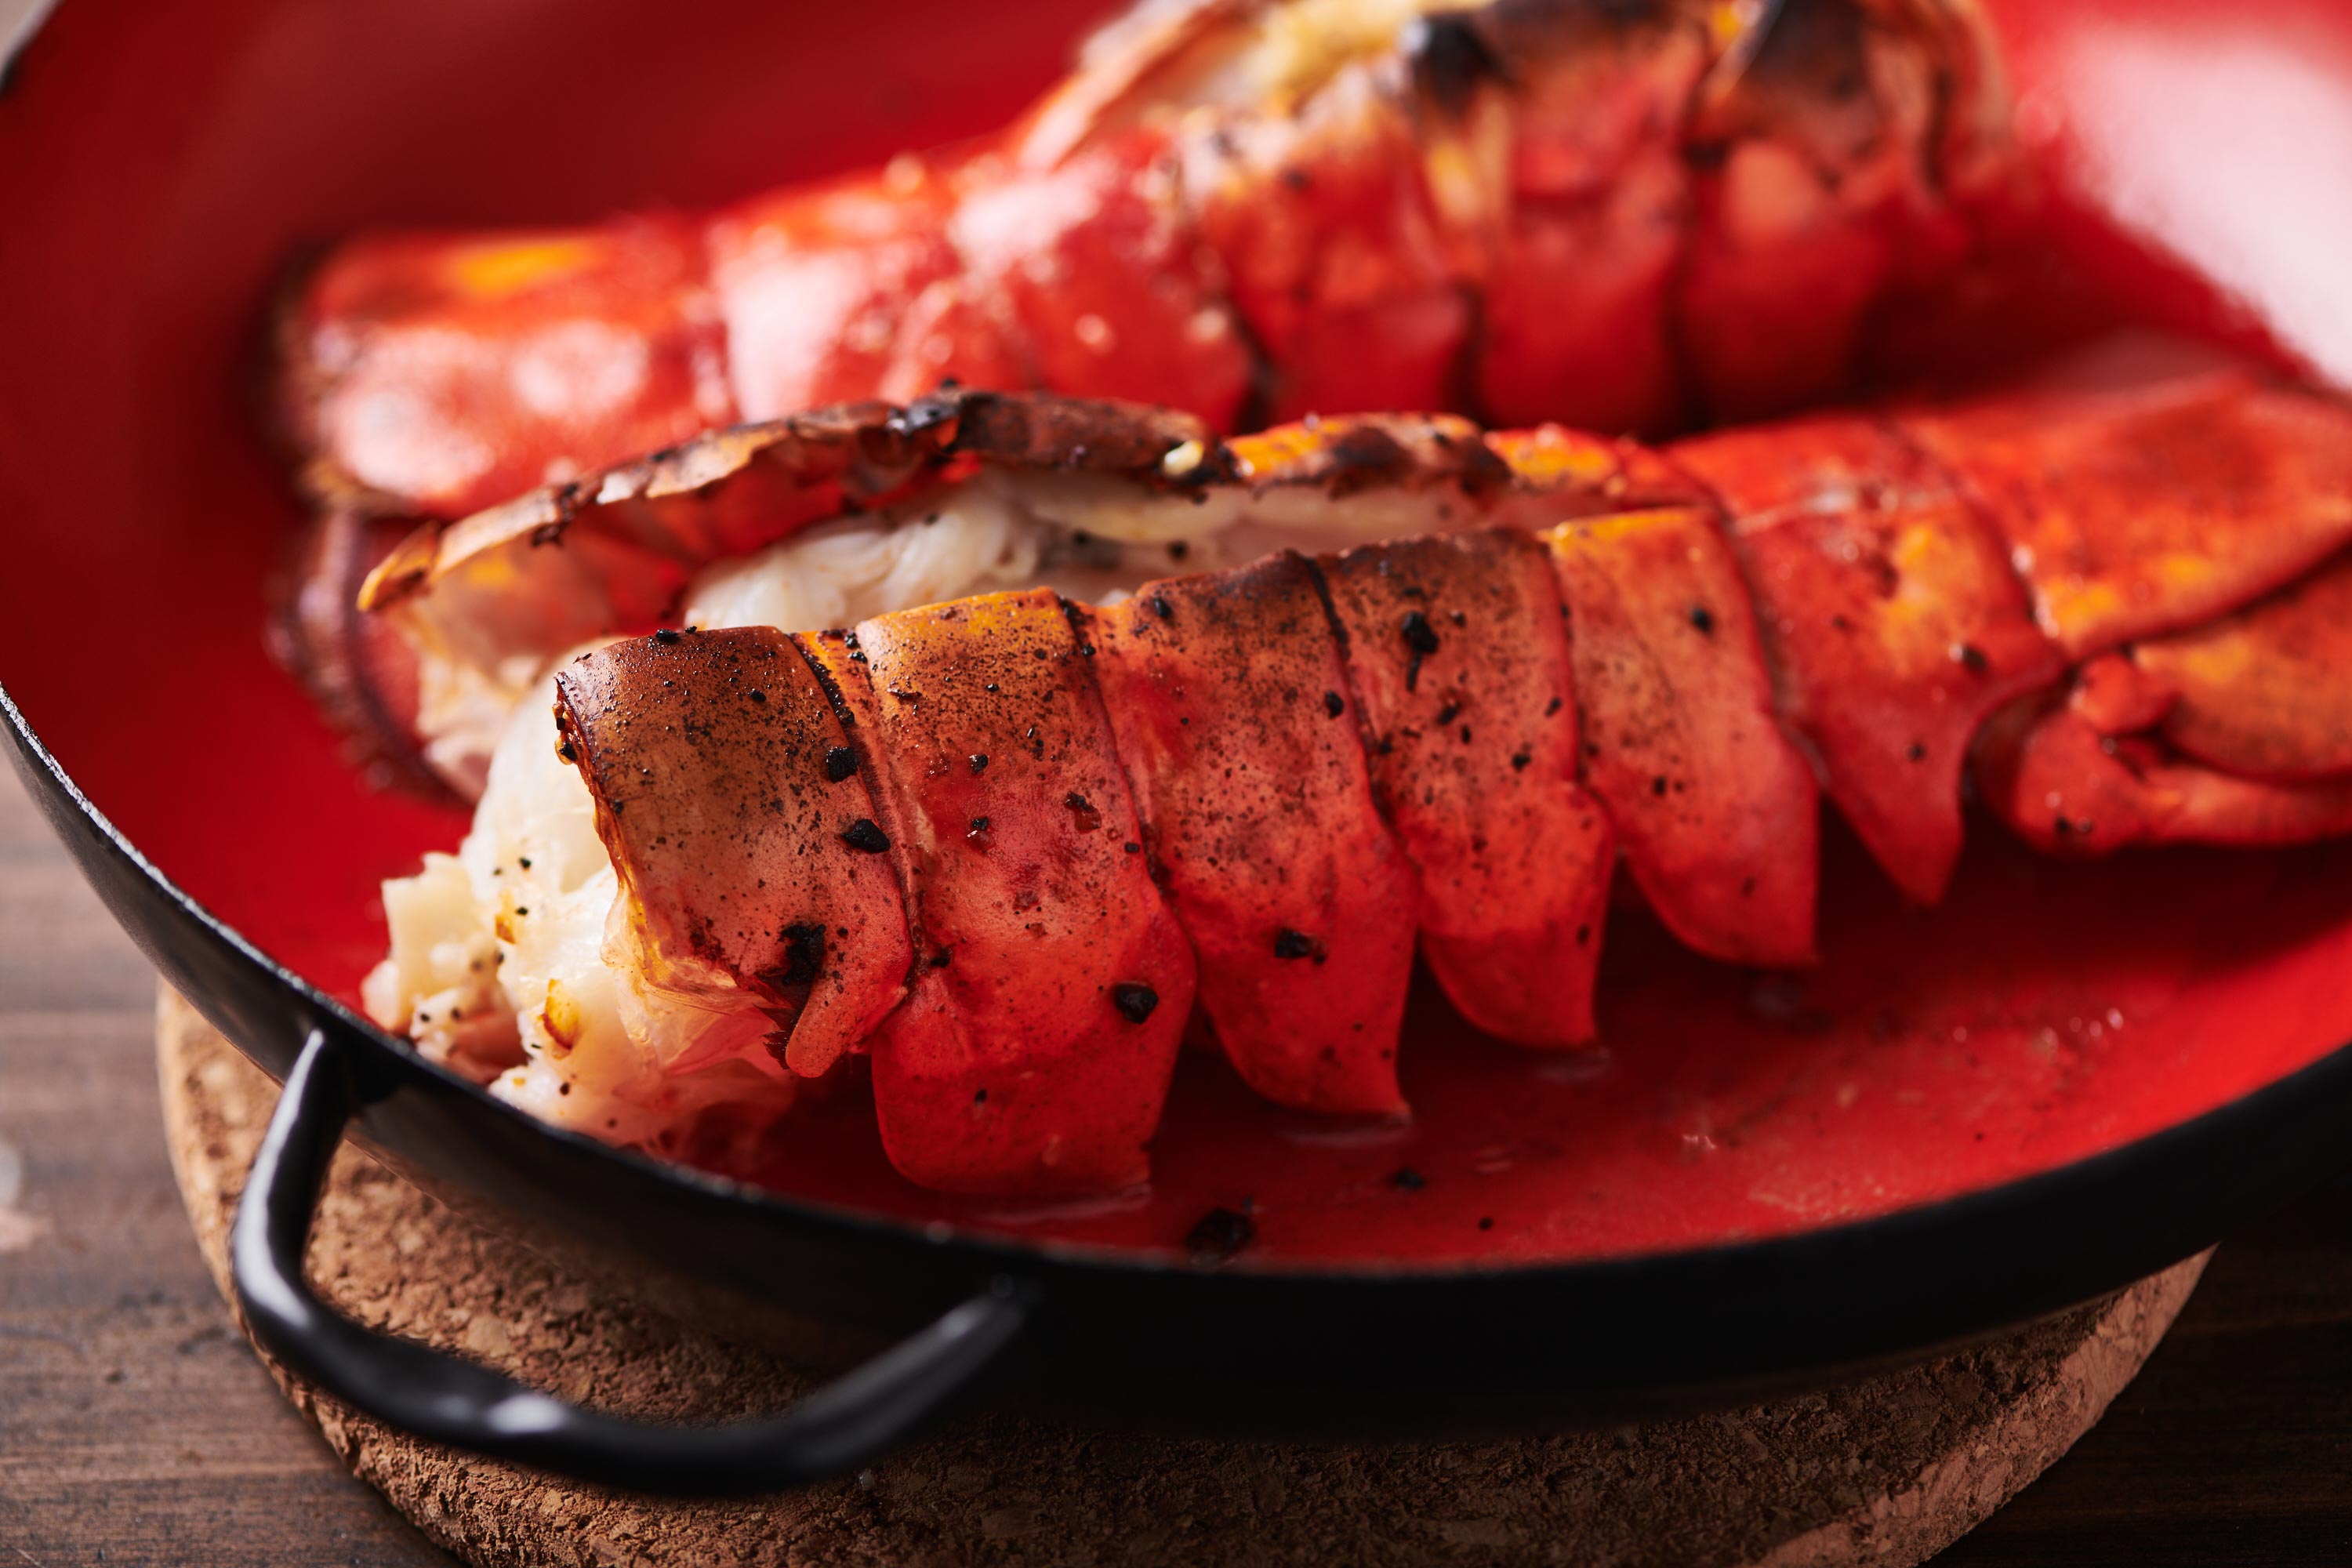 Two split broiled lobster tails in a red baking dish.